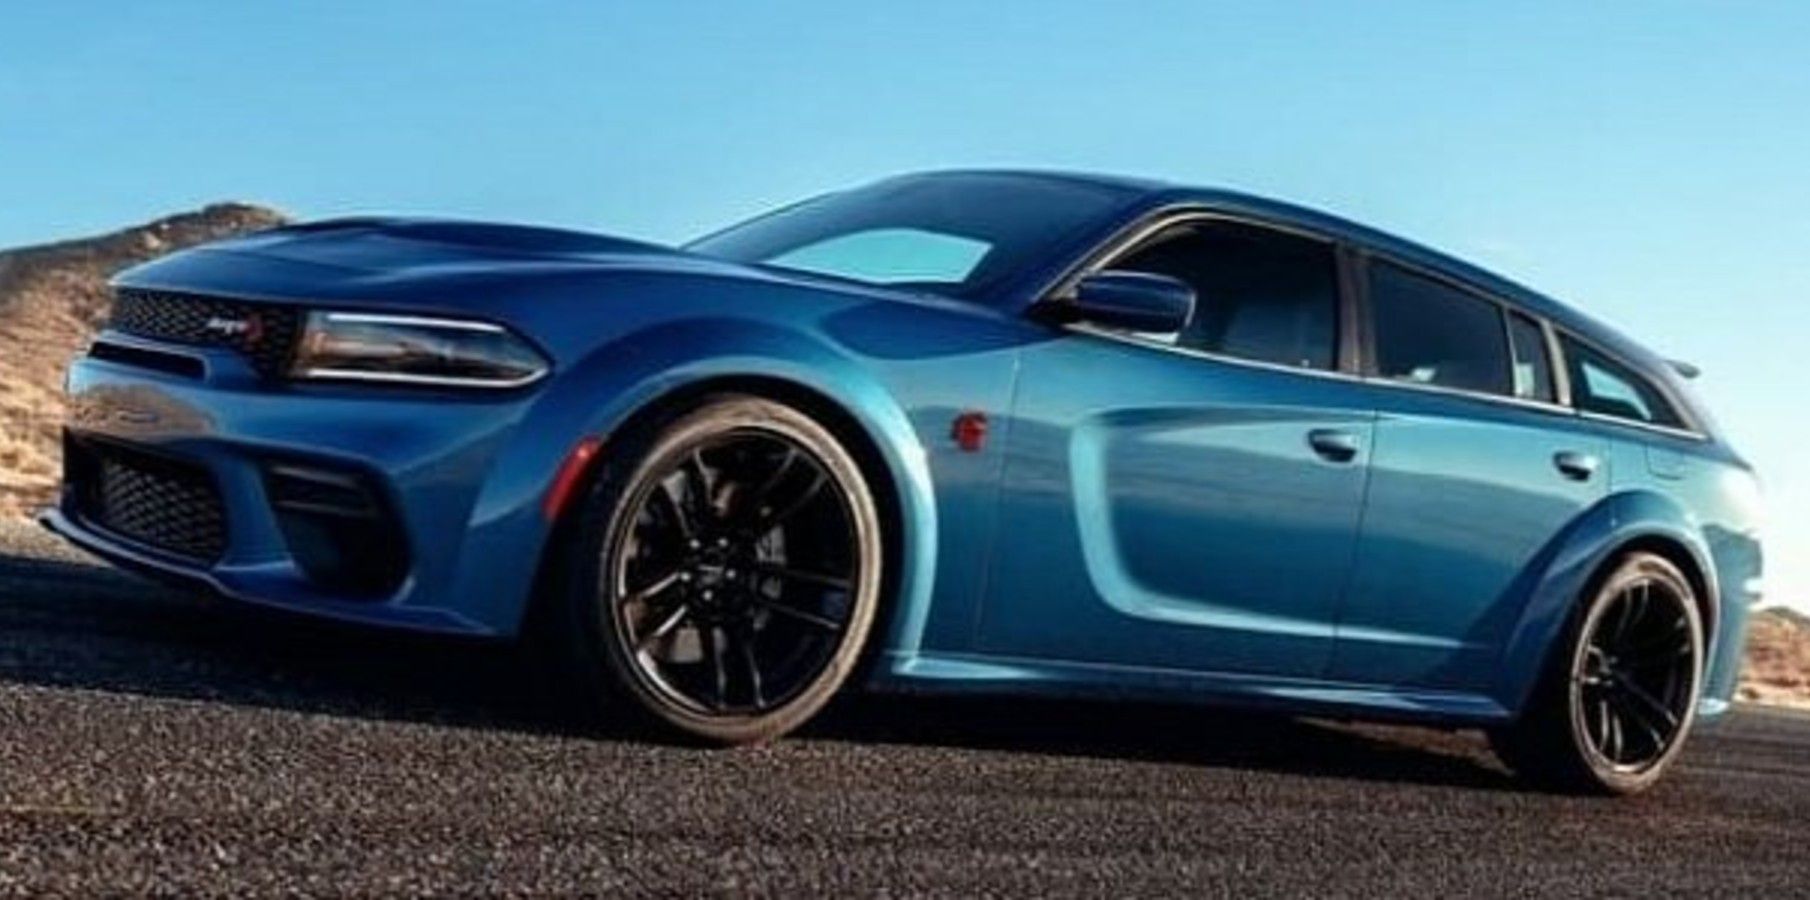 A rendering of what a Hellcat Magnum could look like in today's market